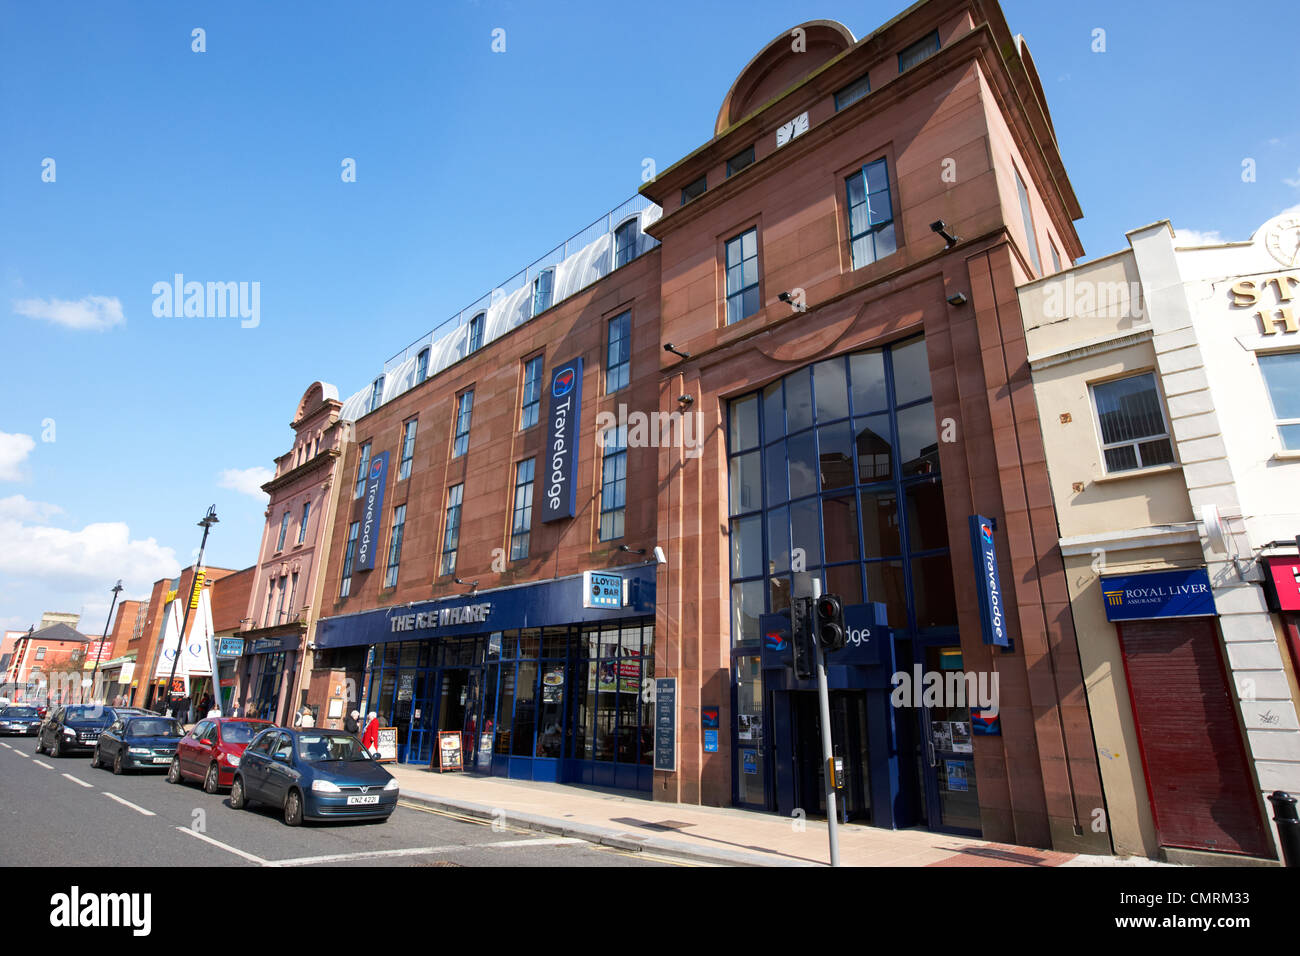 Derry city travelodge and the ice wharf pub county londonderry northern ireland uk. Stock Photo